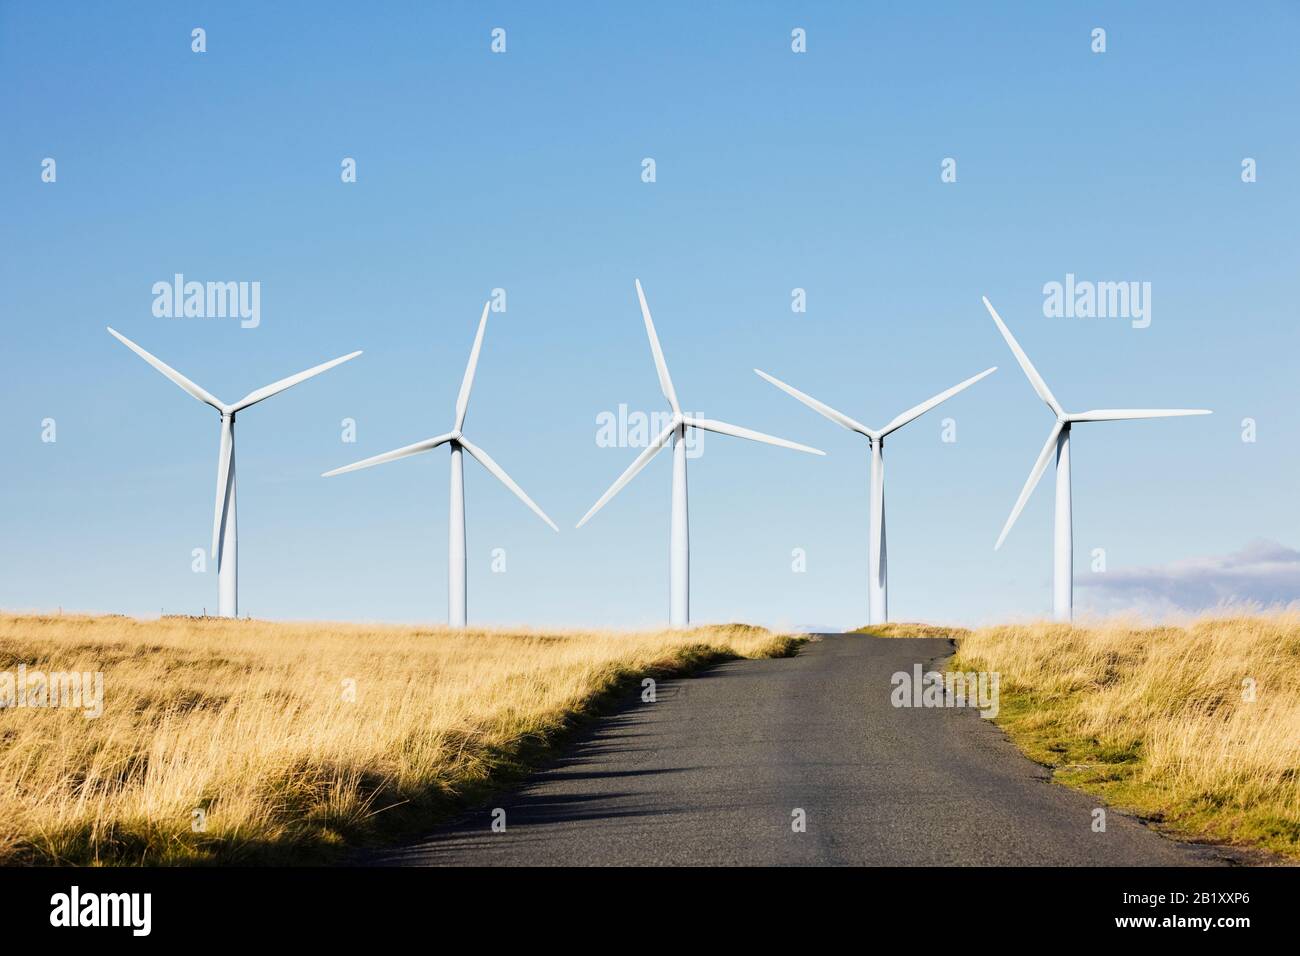 Wind farm at the end of a rural countryside road Stock Photo